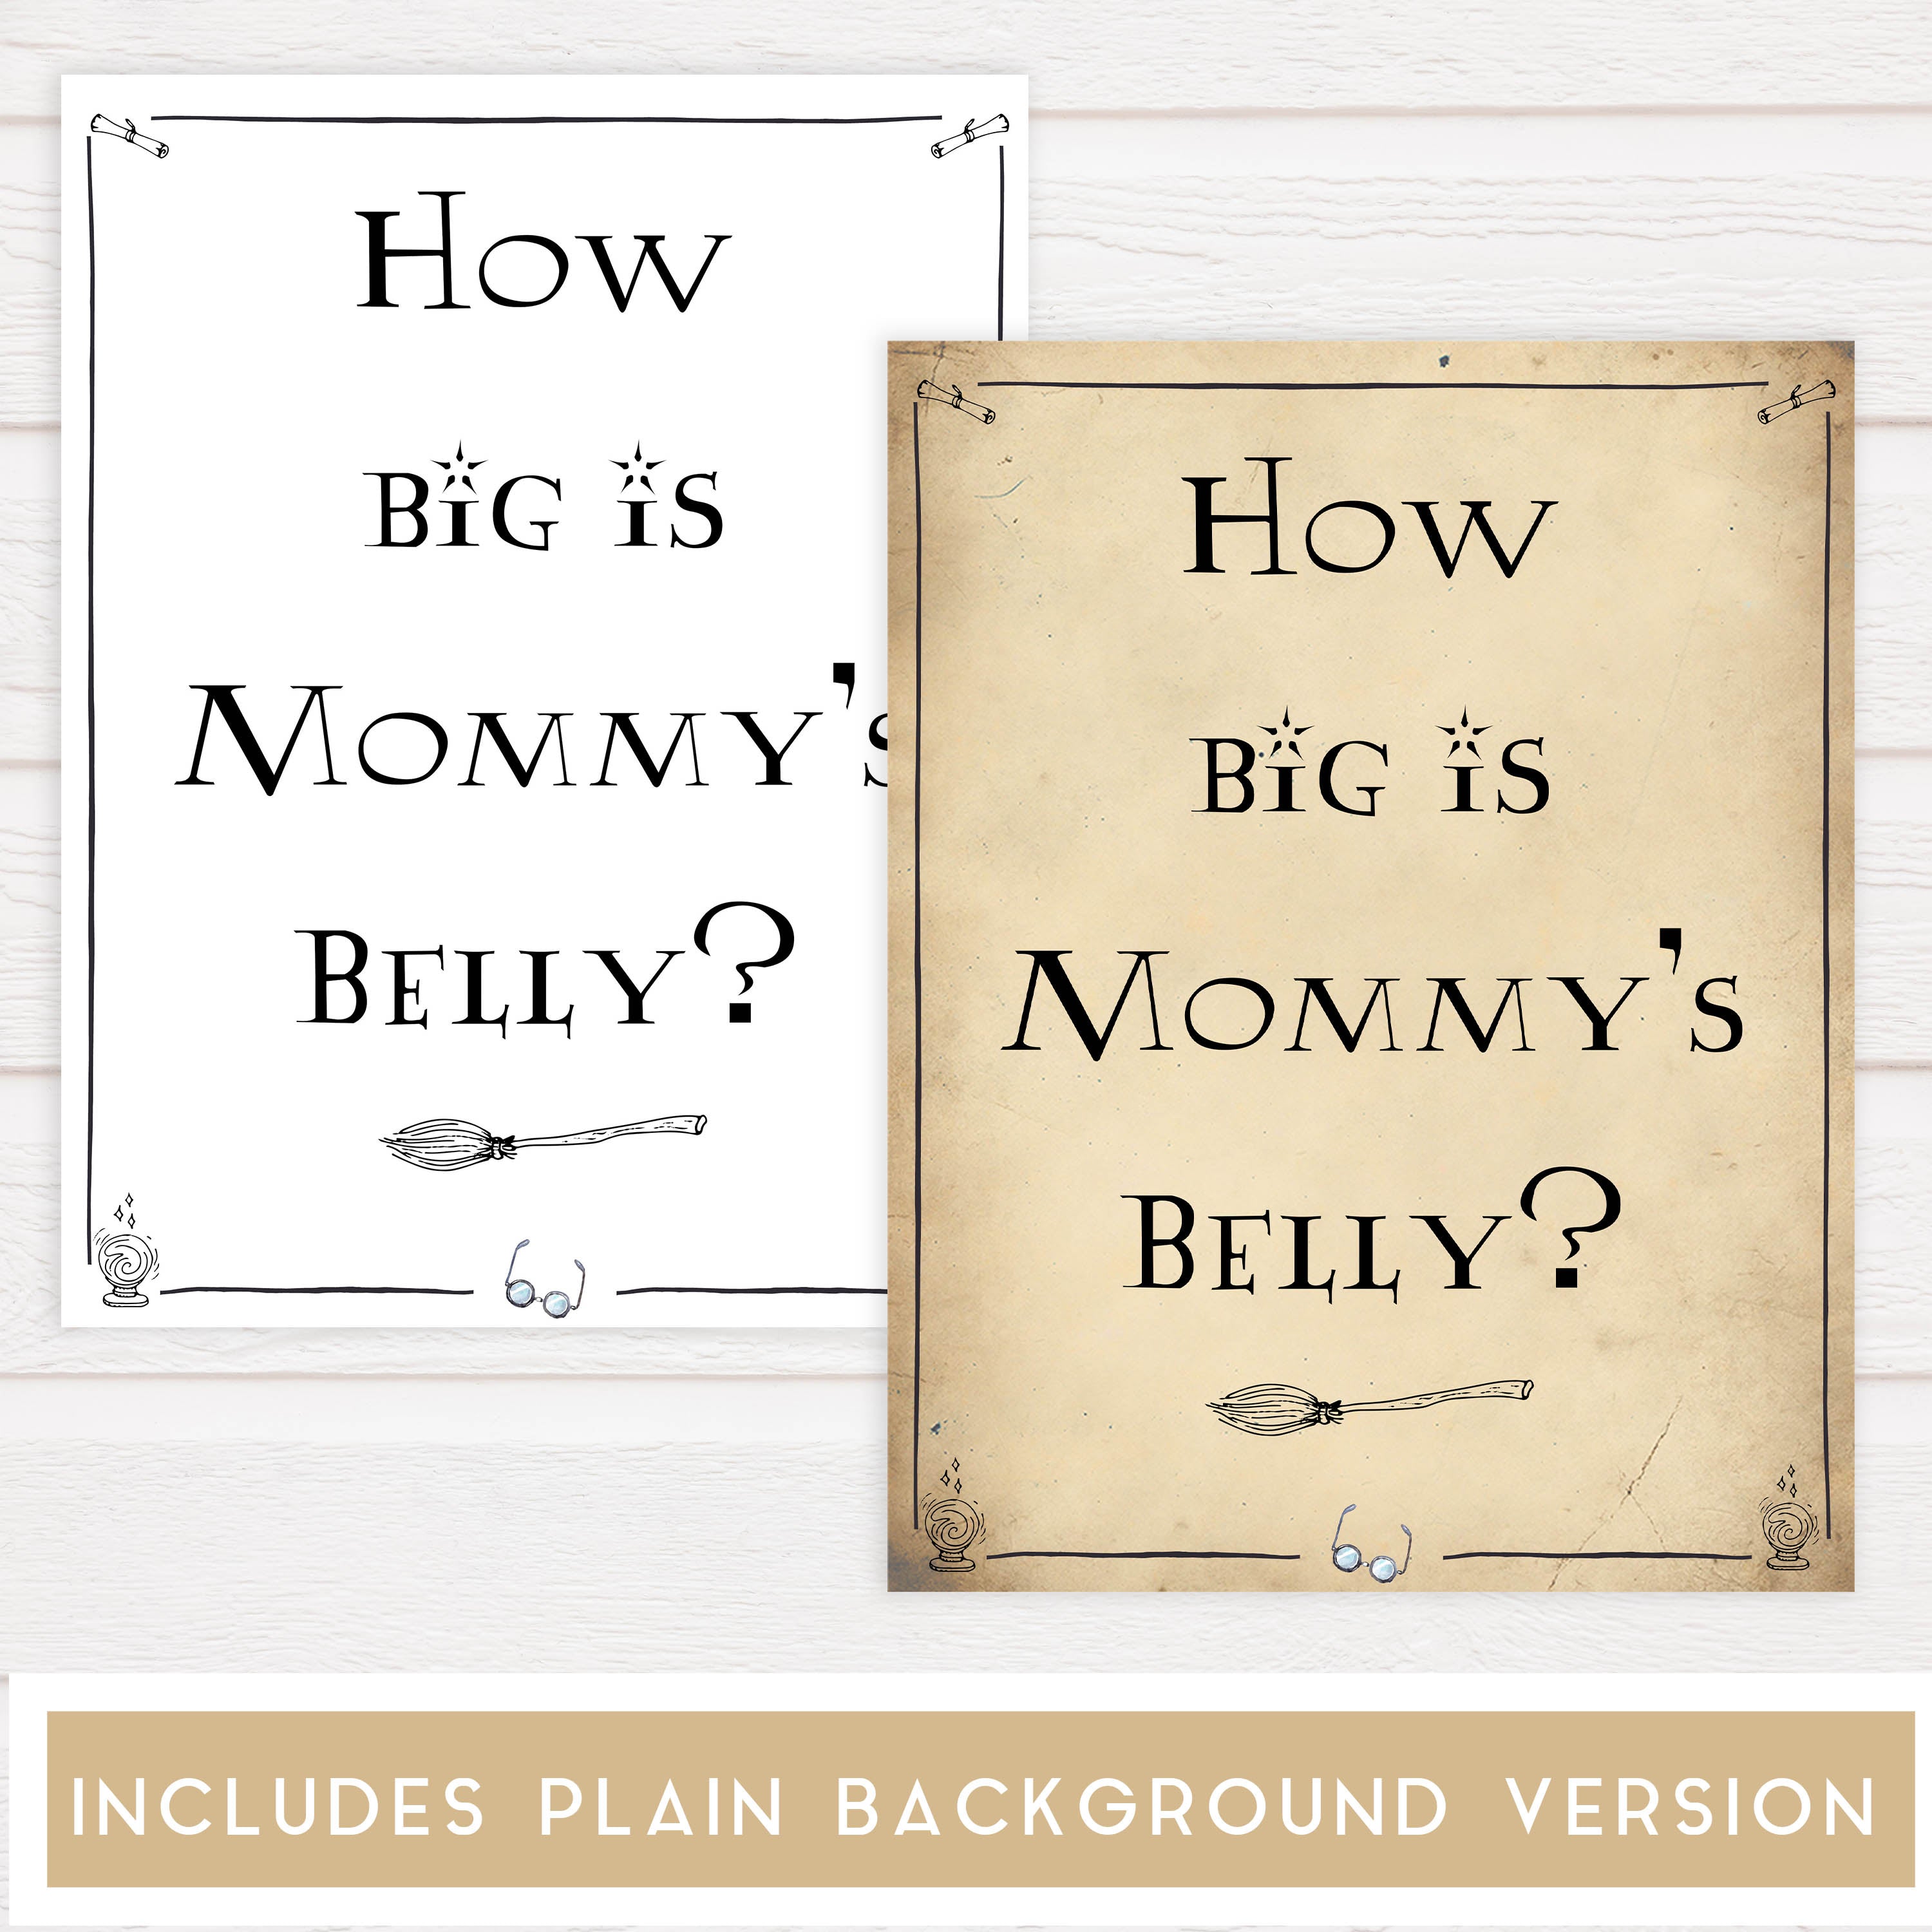 How big is mommys belly game, Wizard baby shower games, printable baby shower games, Harry Potter baby games, Harry Potter baby shower, fun baby shower games,  fun baby ideas